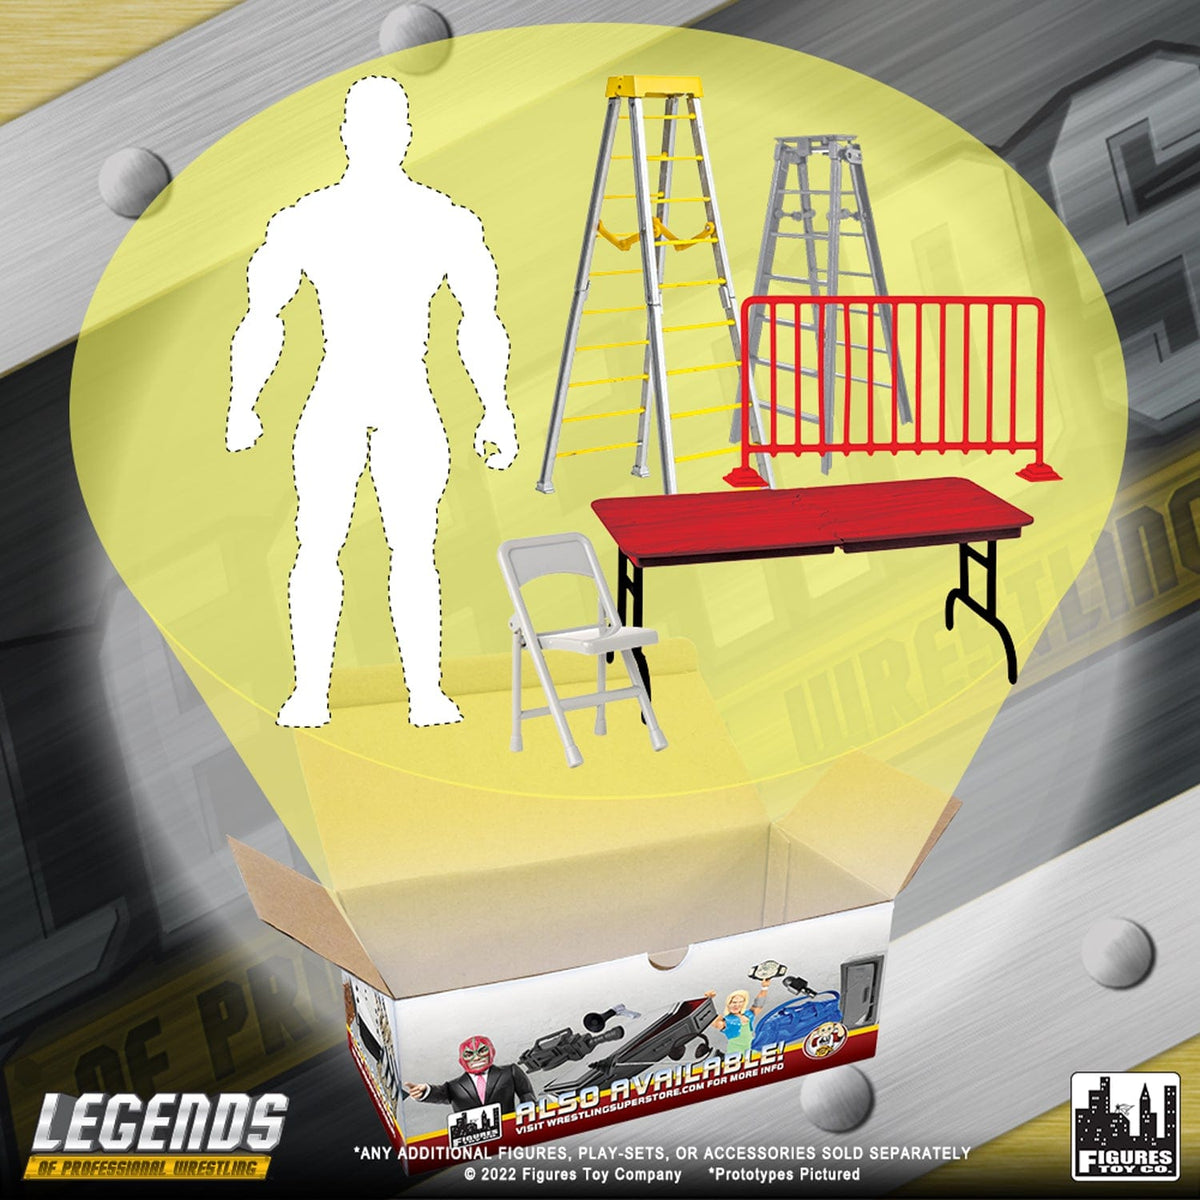 Legends of Professional Wrestling Series Action Figures: Accessory Set &amp; FREE Loose Figure